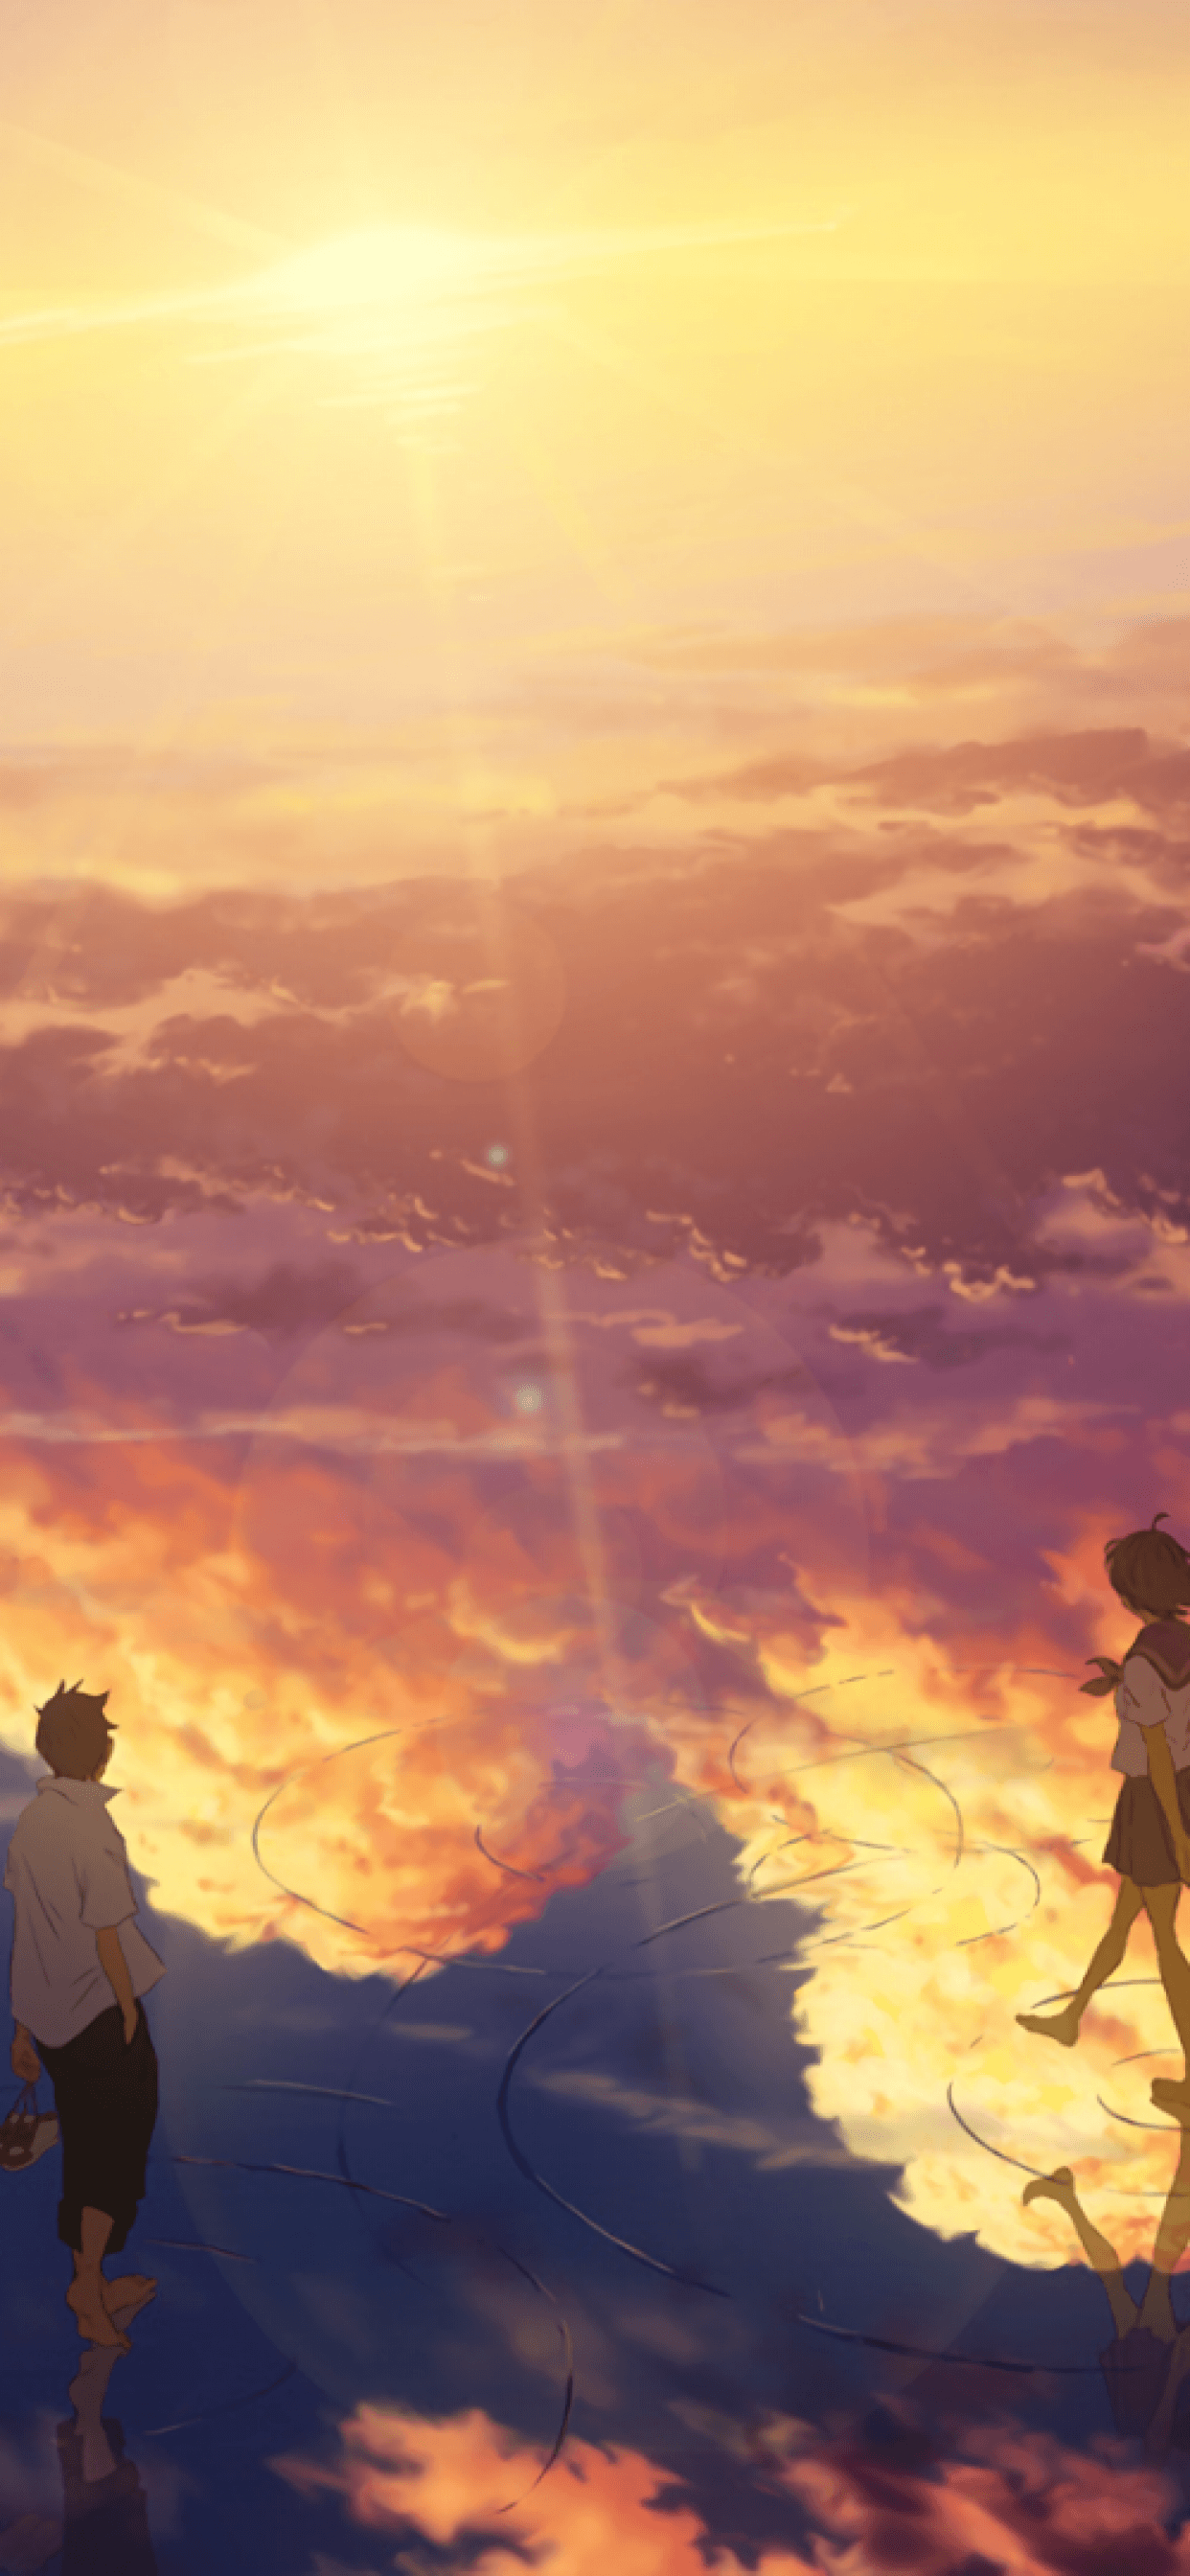 Download 1242x2688 Anime Landscape, Beyond The Clouds, Sunset